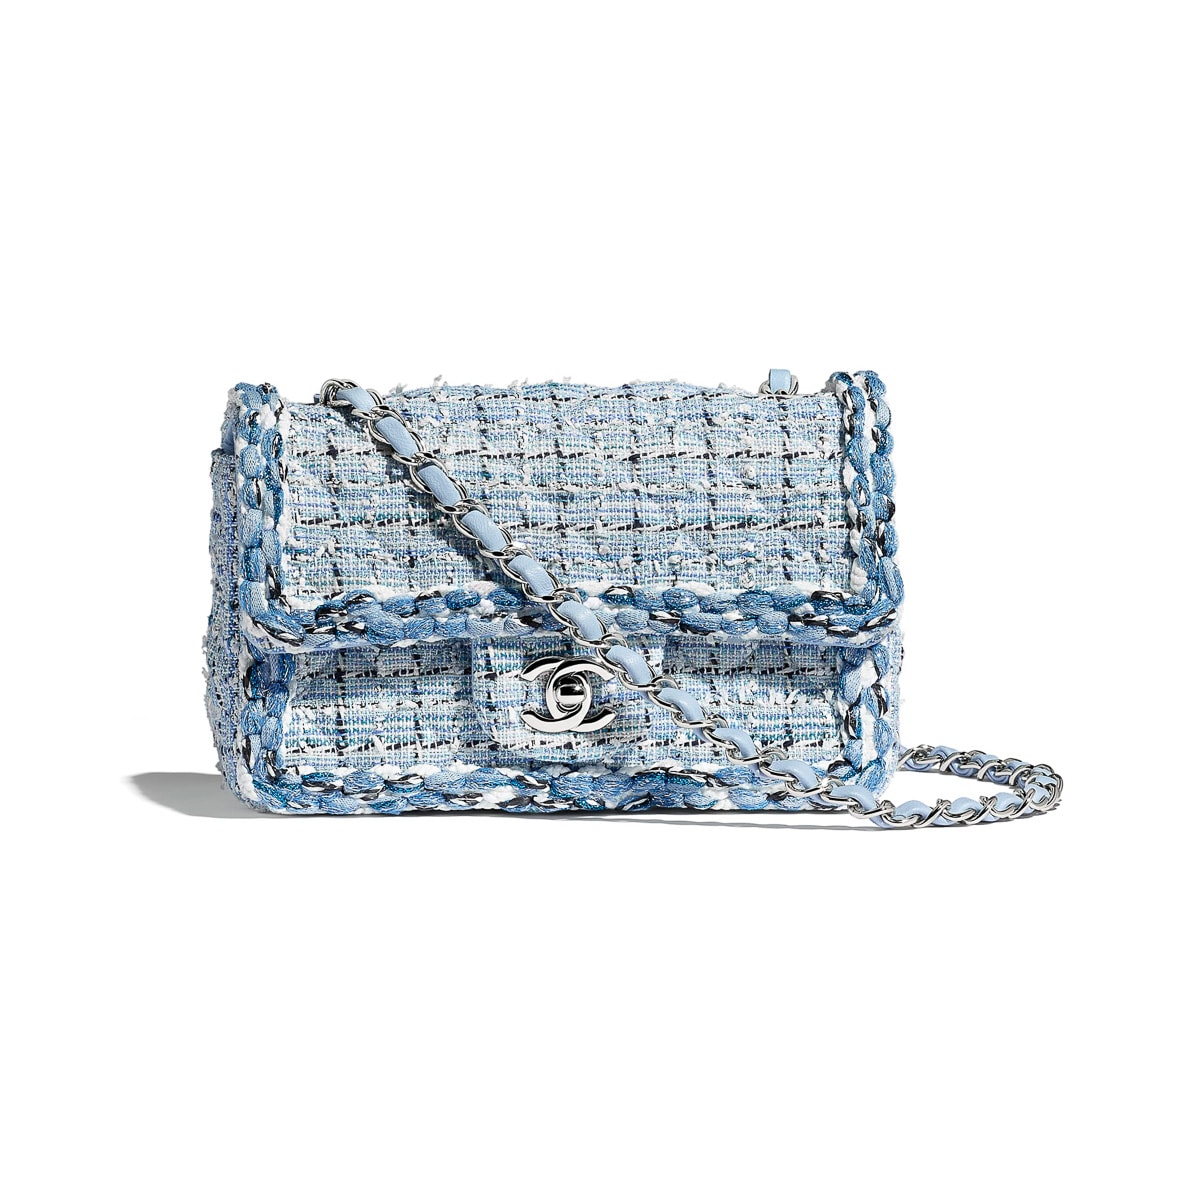 Chanel's Cruise 2019 Collection Takes to the High Seas with Plenty of  Nautical-Themed Bags - PurseBlog